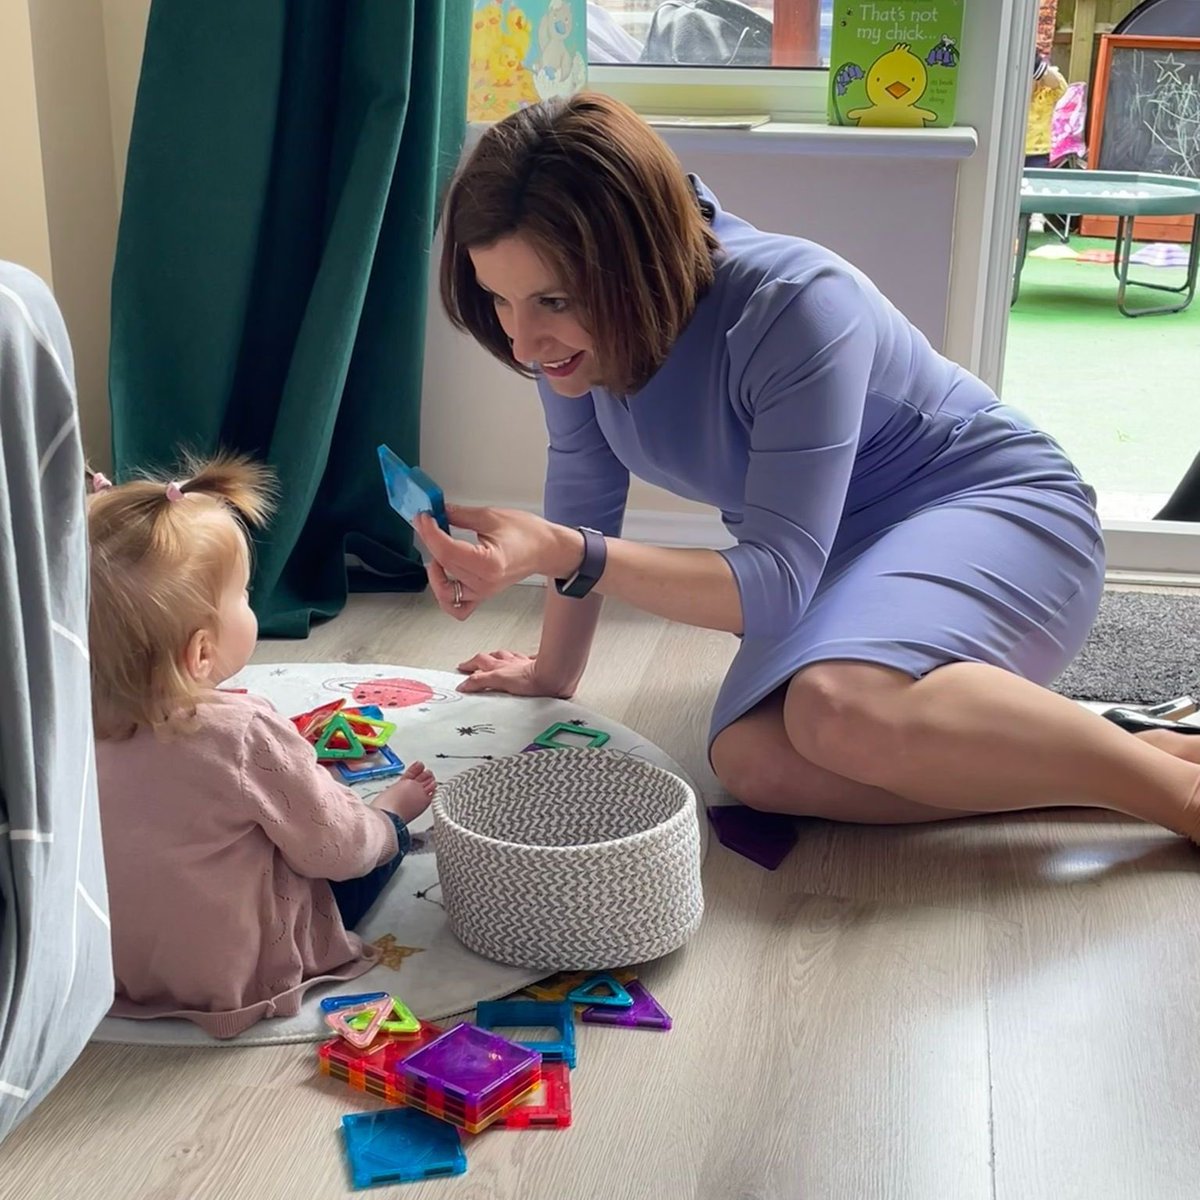 Getting the early years right is so important. That’s why parents are so frustrated that under the Conservatives, they can’t get the childcare they need. Labour’s Early Years Review will ensure we can build a modernised childcare system, and keep the promises we make.